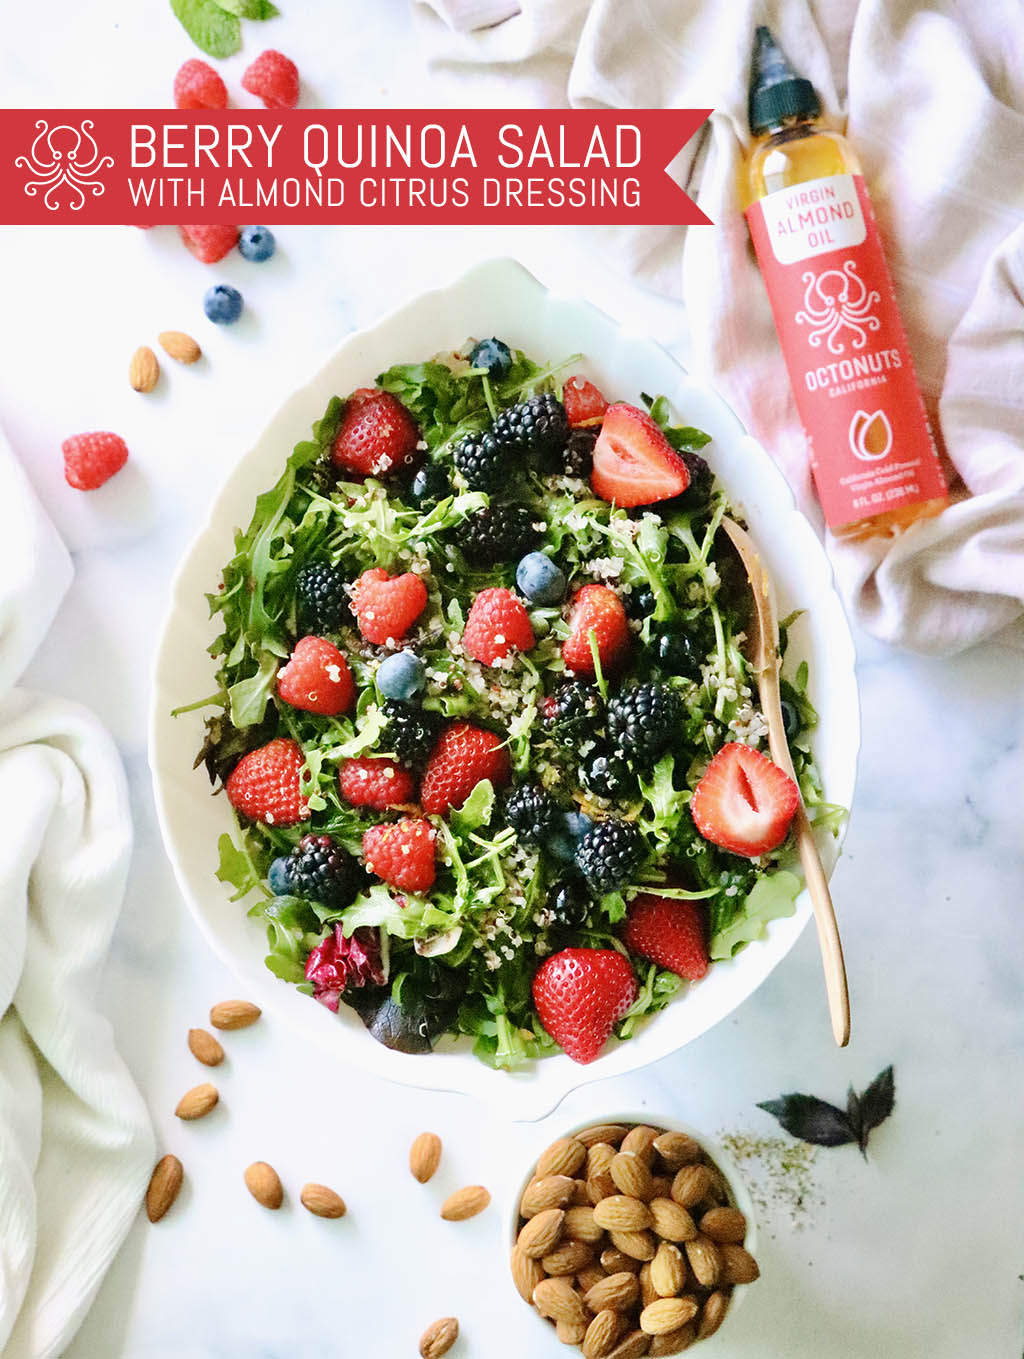 Berry Quinoa Salad with Octonuts Almond Oil Citrus Dressing